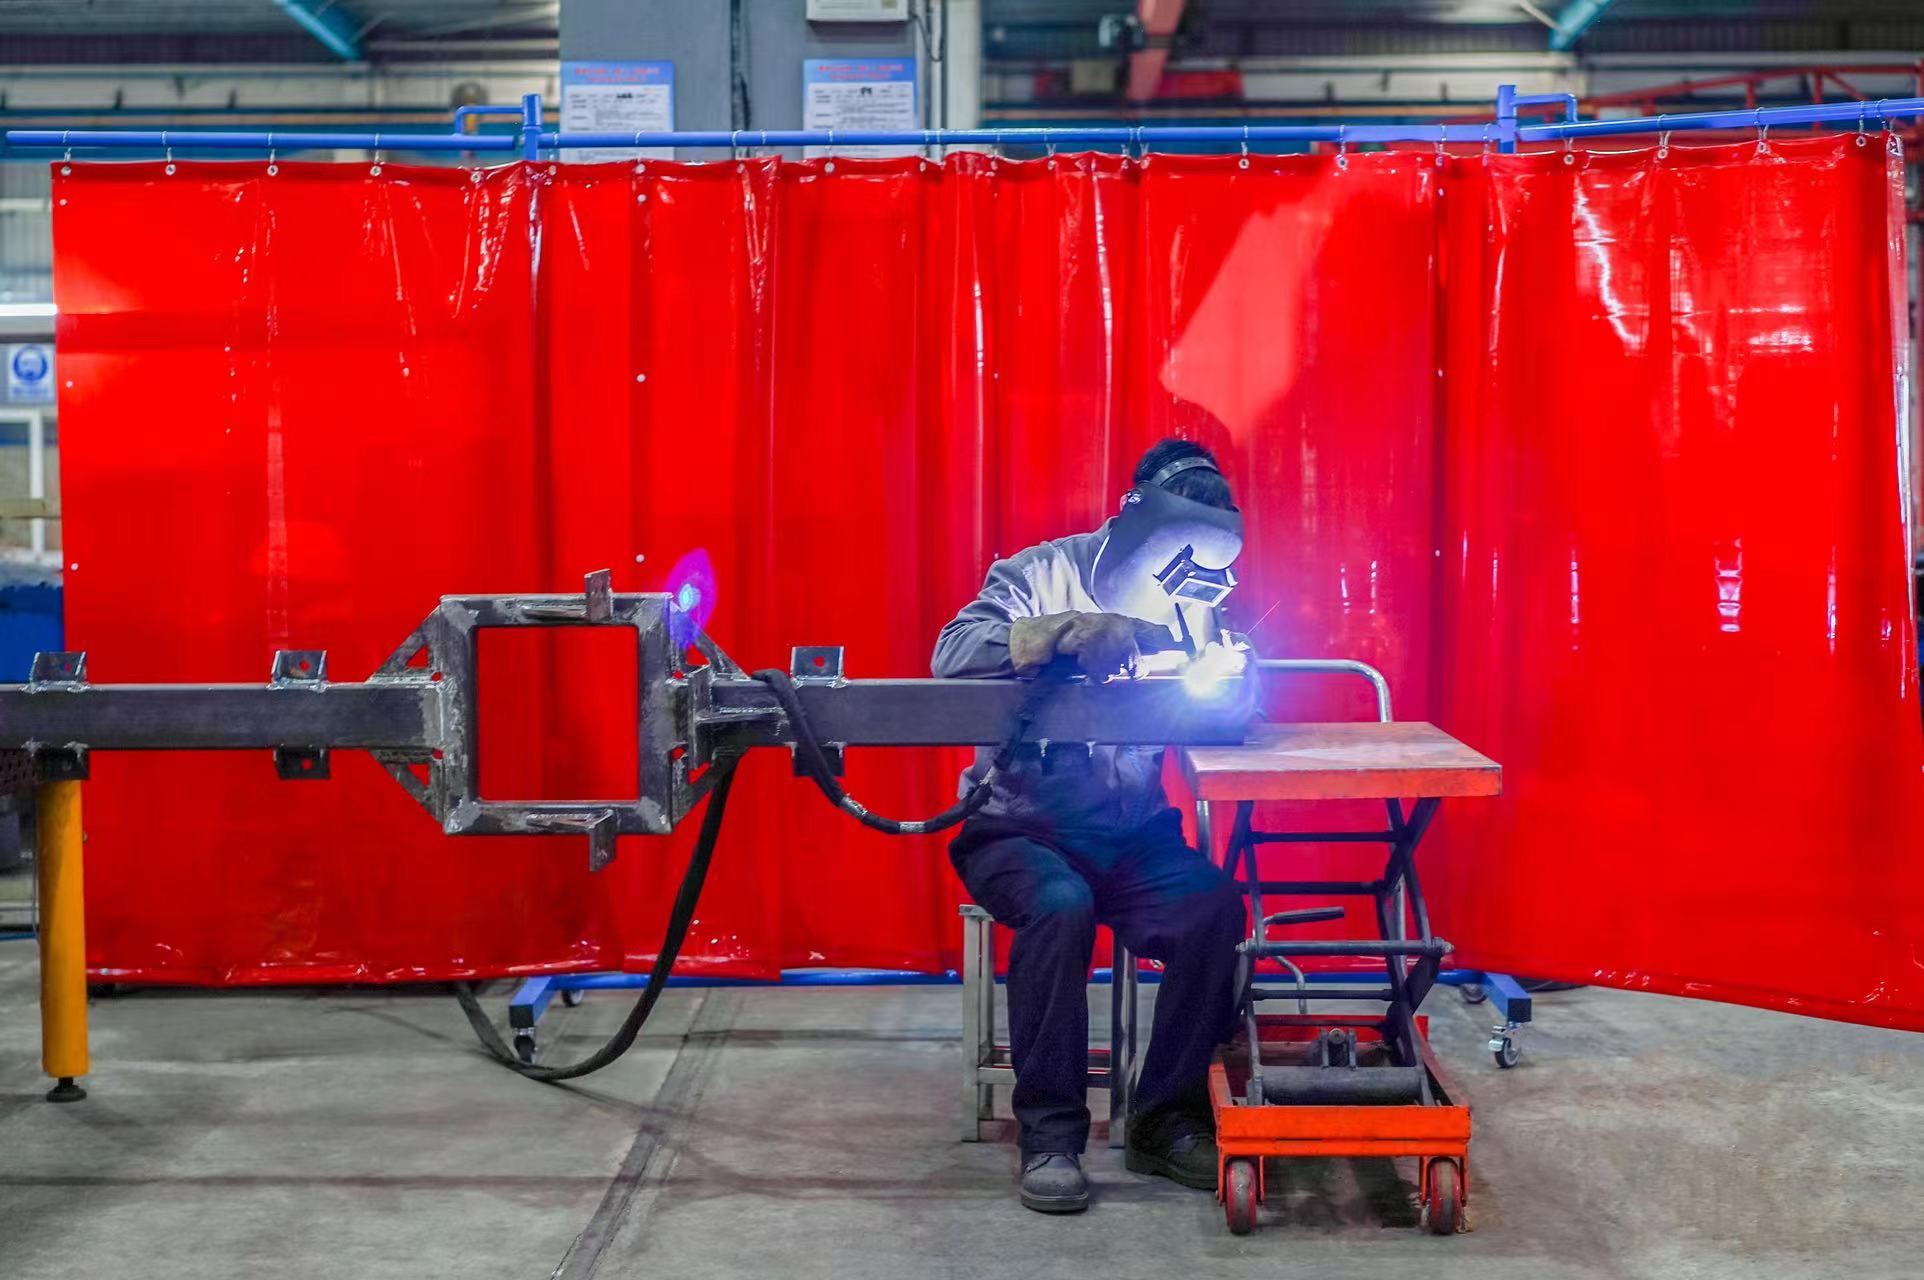 man welding with PVC welding curtains in the background as protection